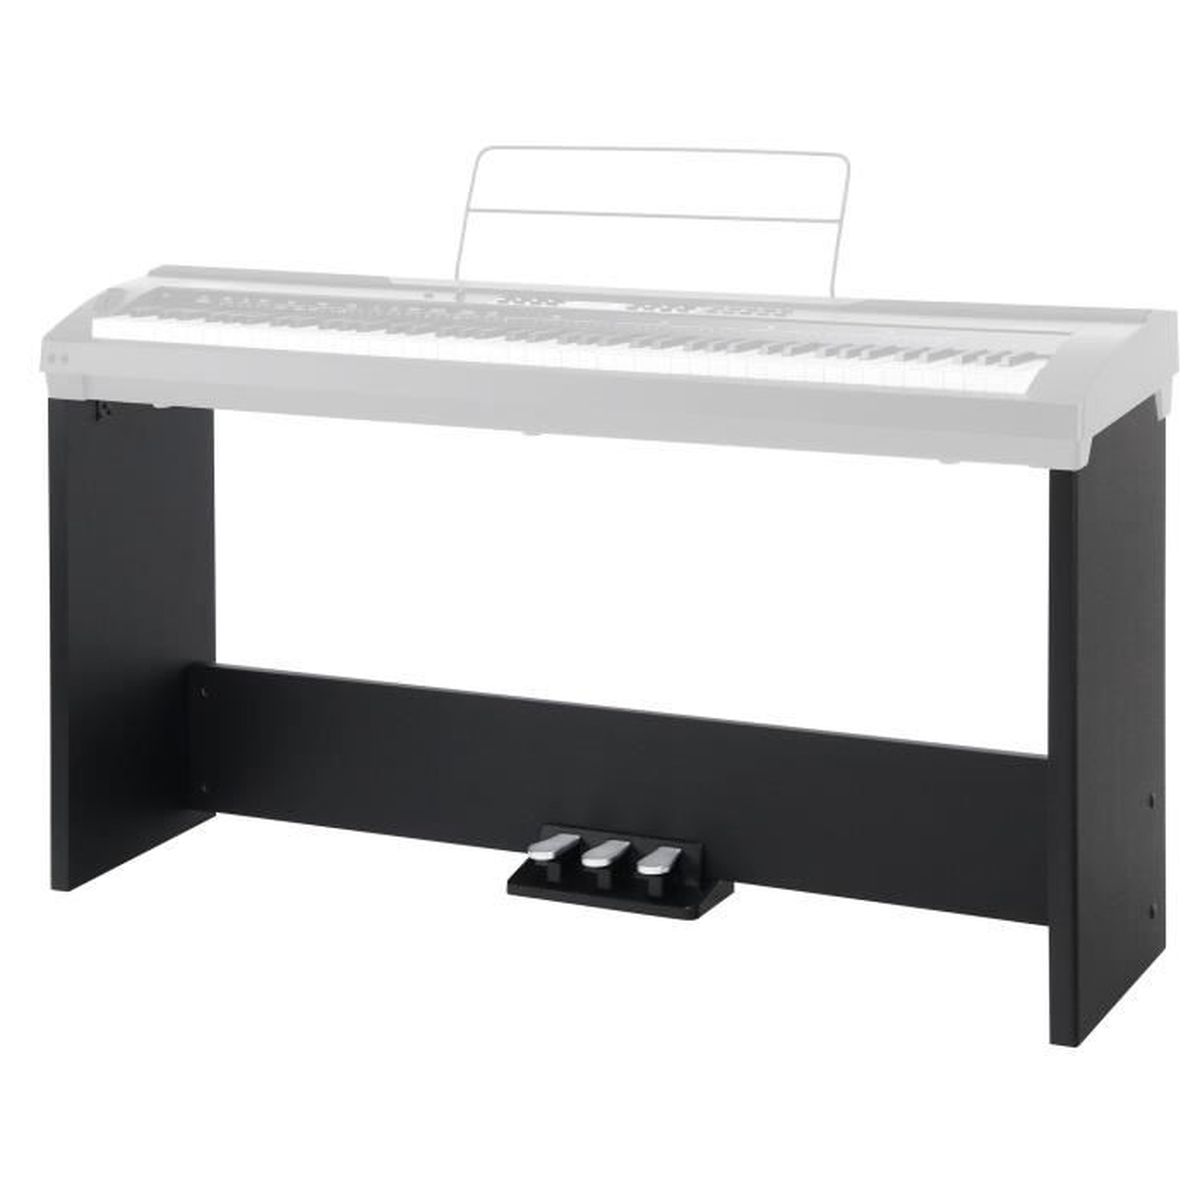 Support yamaha clavier - Cdiscount